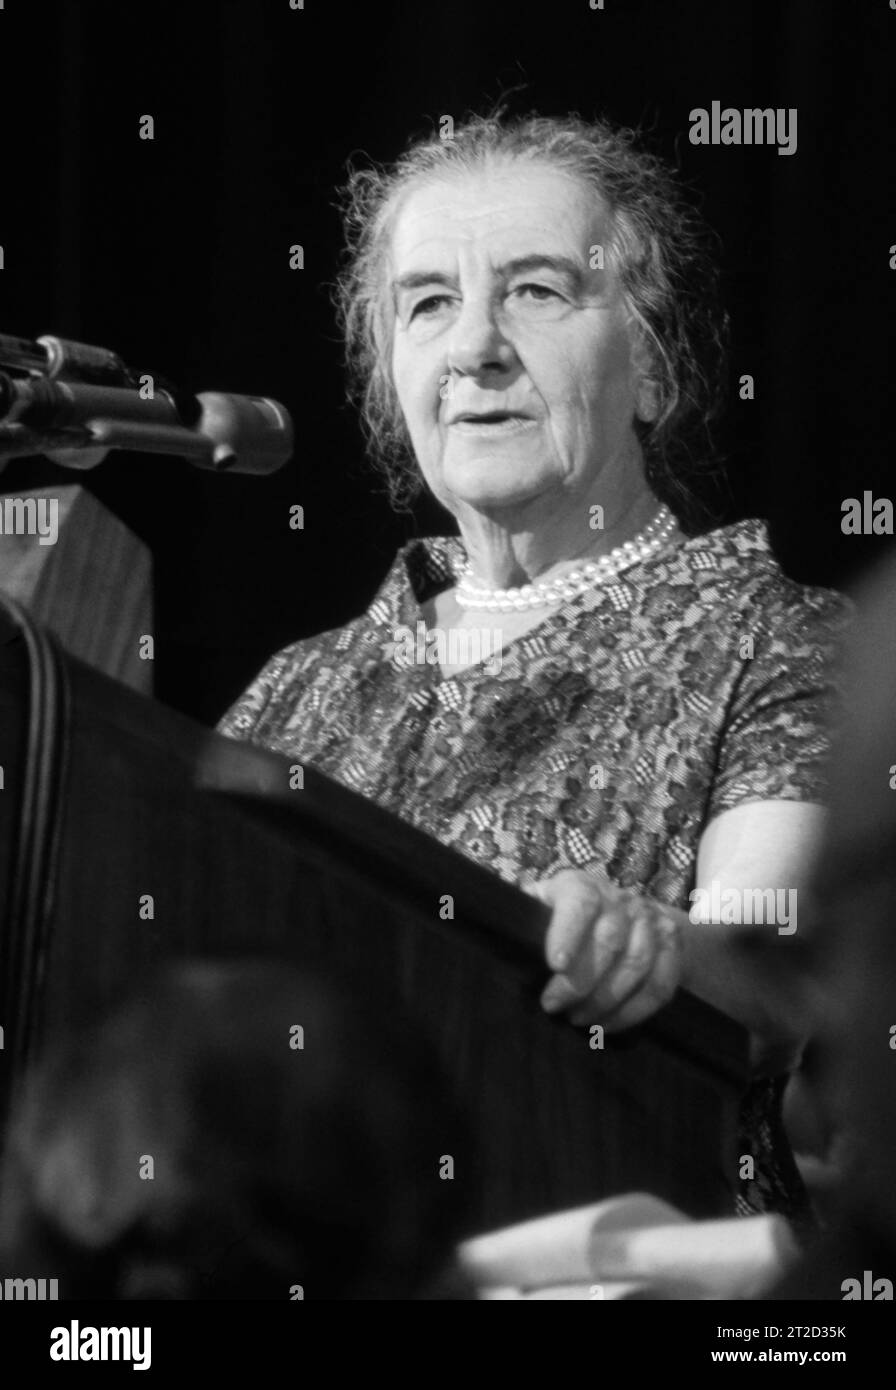 Israel's Prime Minister, Golda Meir (1898-1978), speaking at the Waldorf-Astoria Hotel in New York City in 1969. (USA) Stock Photo